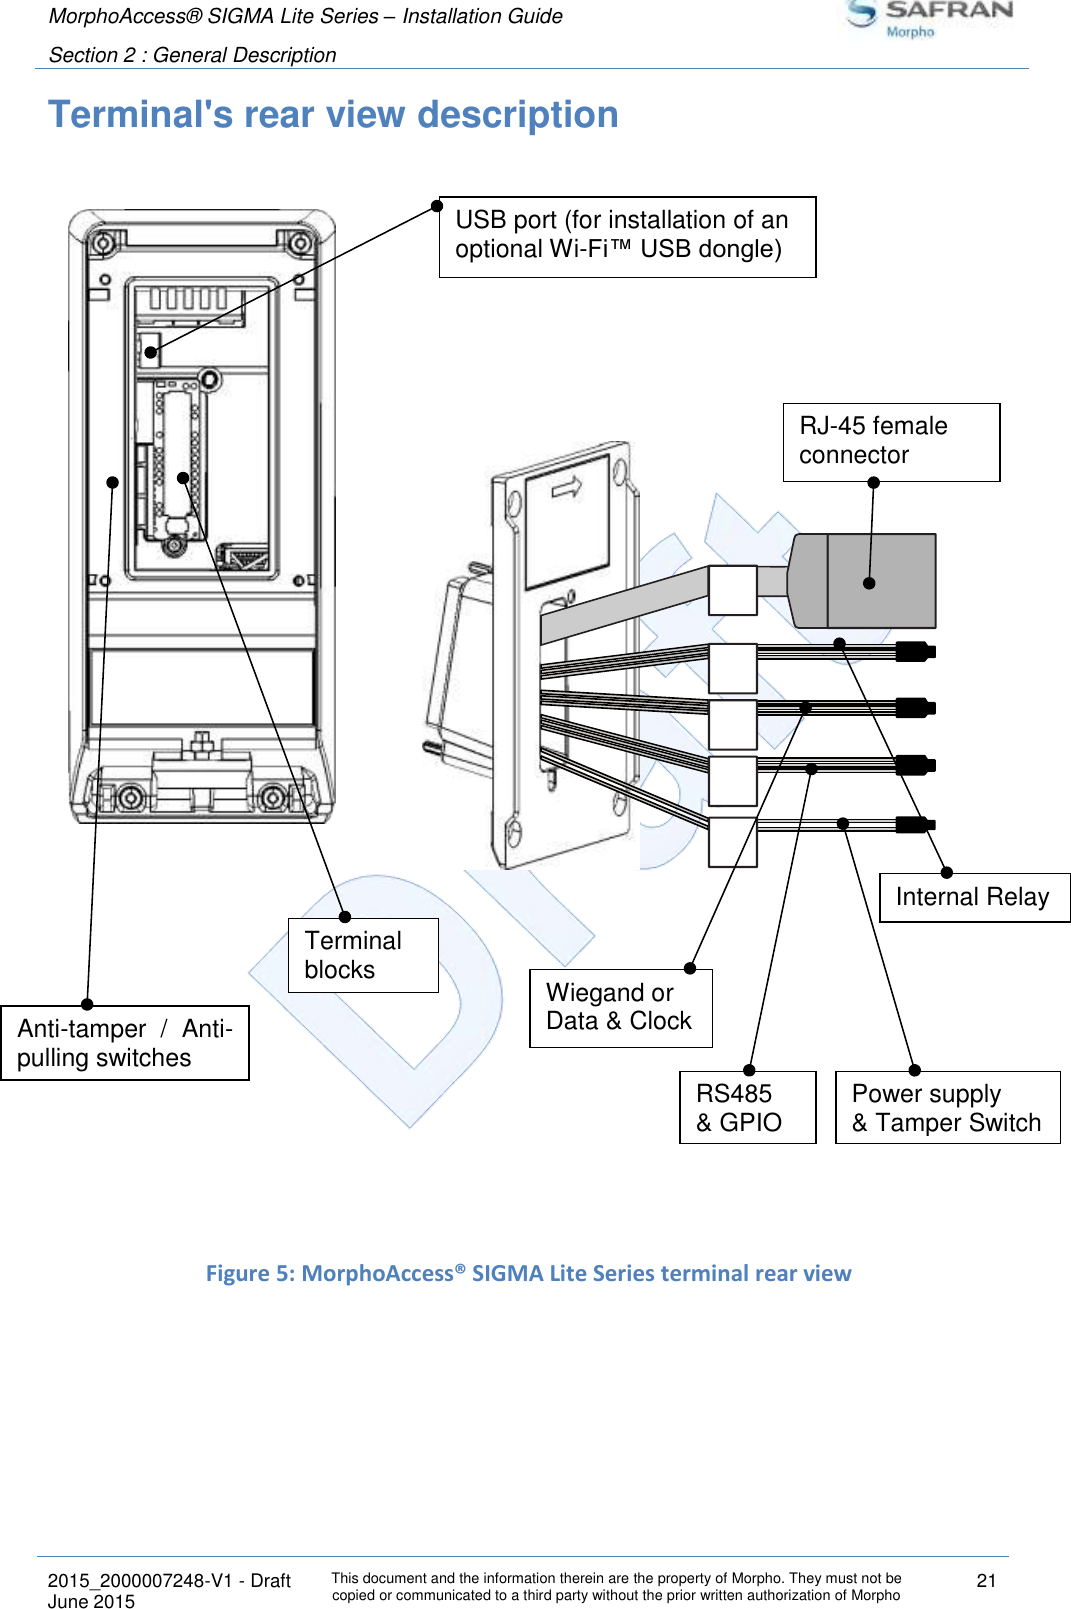 MorphoAccess® SIGMA Lite Series – Installation Guide  Section 2 : General Description   2015_2000007248-V1 - Draft This document and the information therein are the property of Morpho. They must not be copied or communicated to a third party without the prior written authorization of Morpho 21 June 2015   Terminal&apos;s rear view description                        Figure 5: MorphoAccess® SIGMA Lite Series terminal rear view  Terminal blocks USB port (for installation of an optional Wi-Fi™ USB dongle) Anti-tamper  /  Anti-pulling switches RJ-45 female connector Internal Relay Wiegand or Data &amp; Clock RS485 &amp; GPIO Power supply &amp; Tamper Switch 